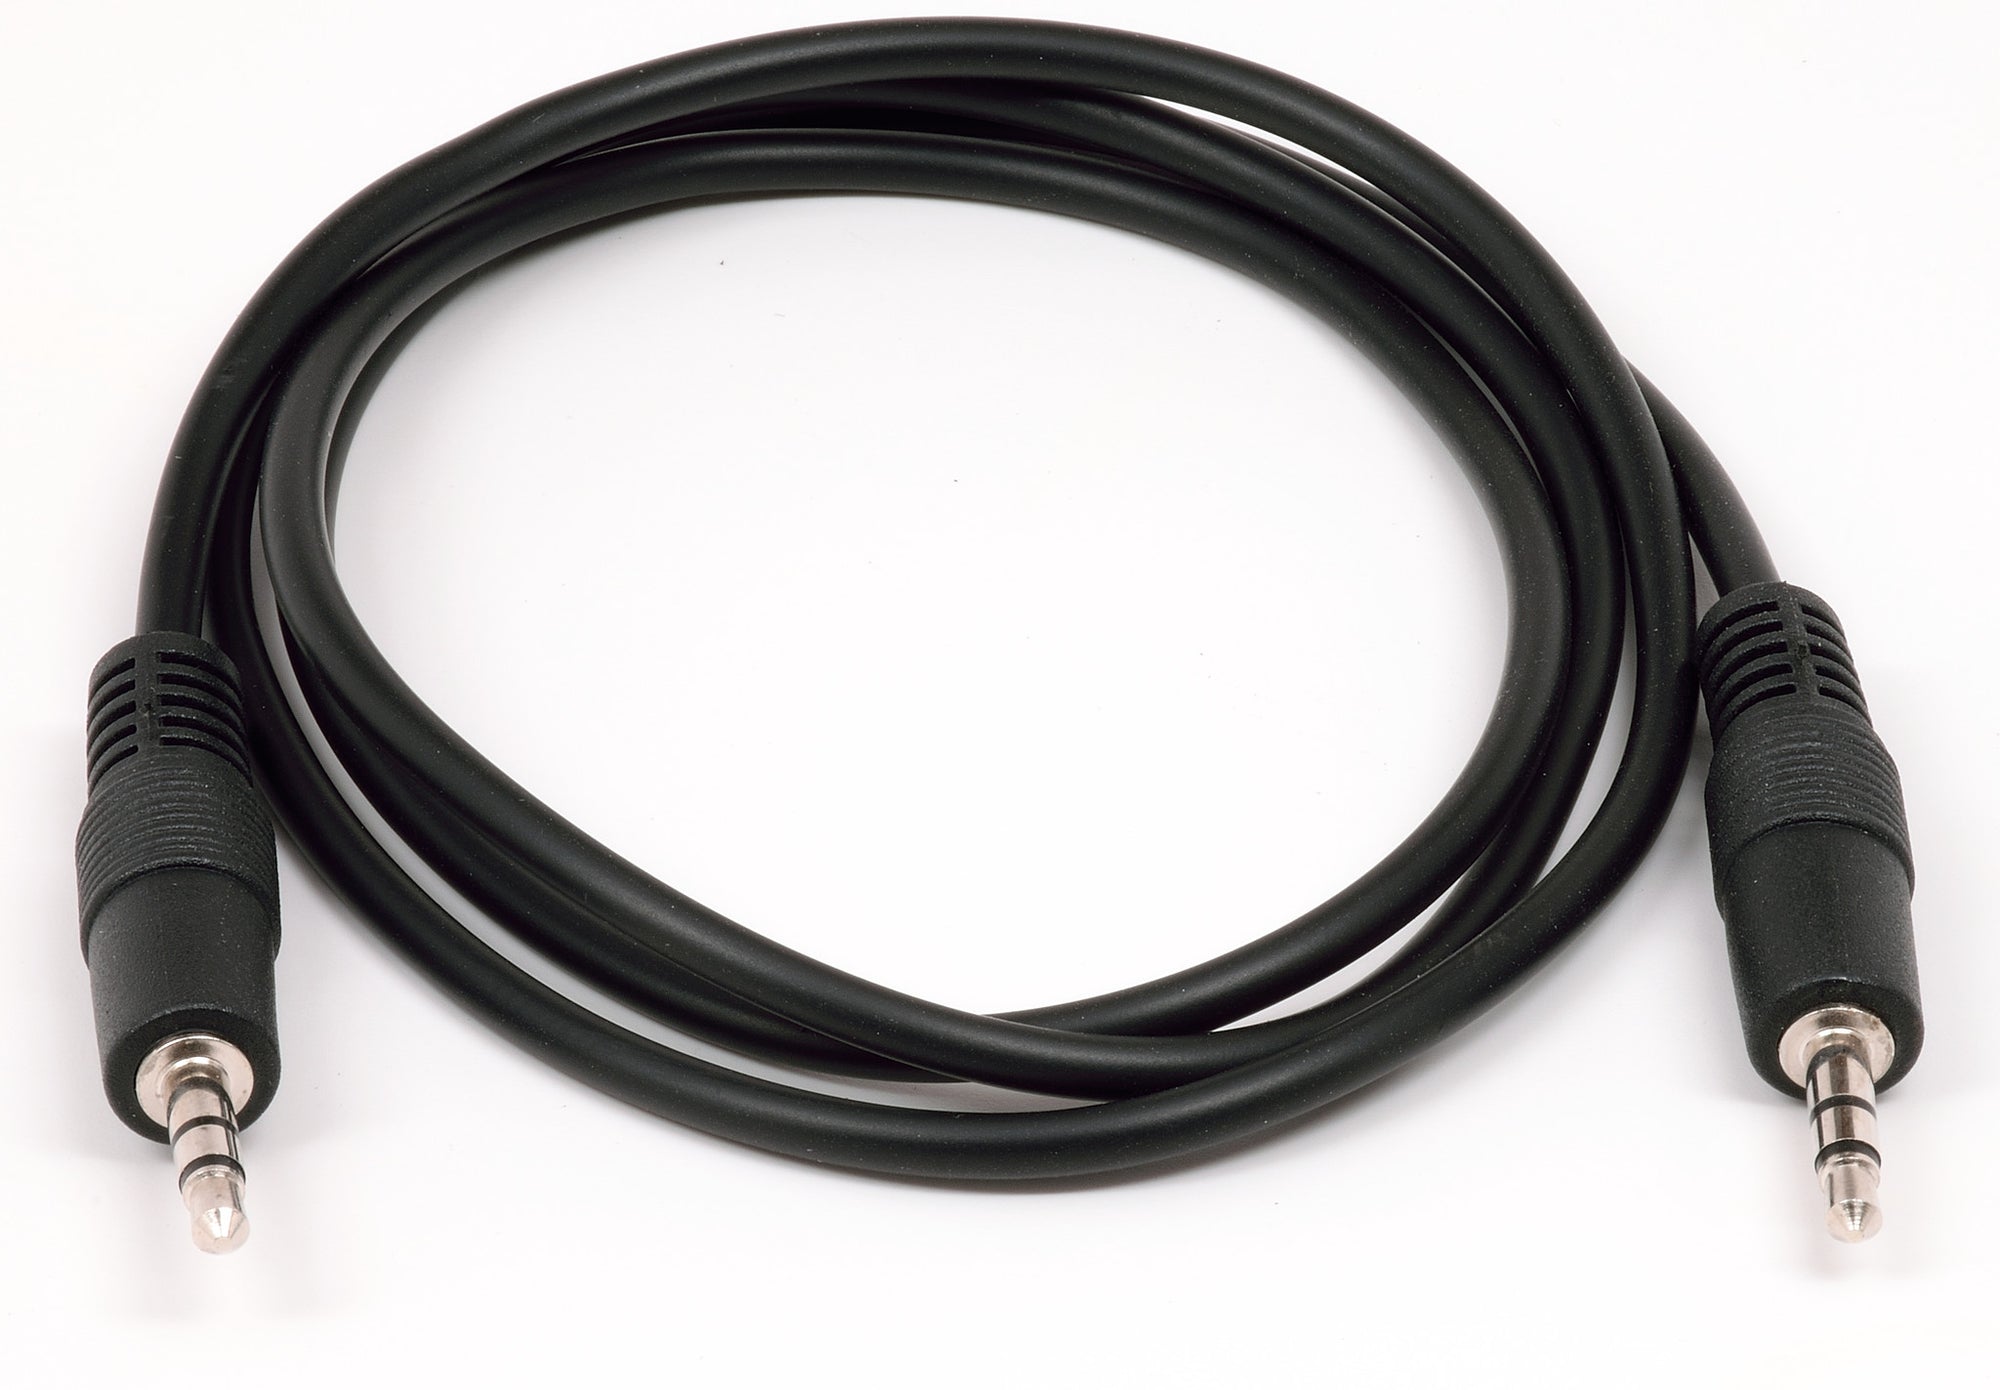 3.5mm TRS Cable - view of entire cable